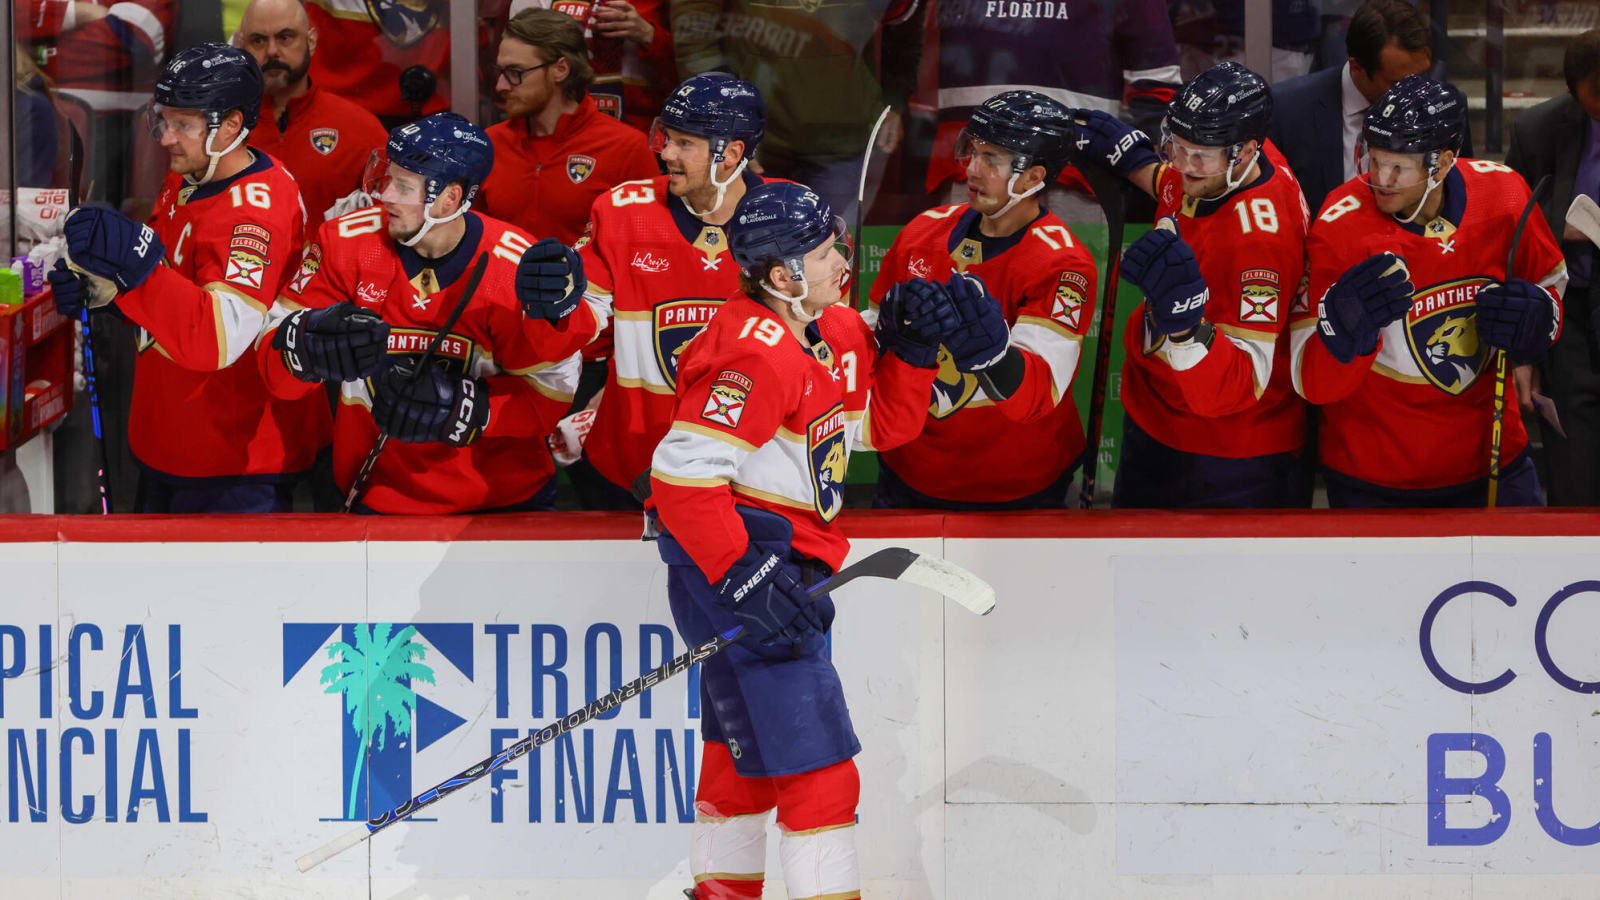 Florida Panthers Fall Flat, Smoked in Game 1 by the Boston Bruins